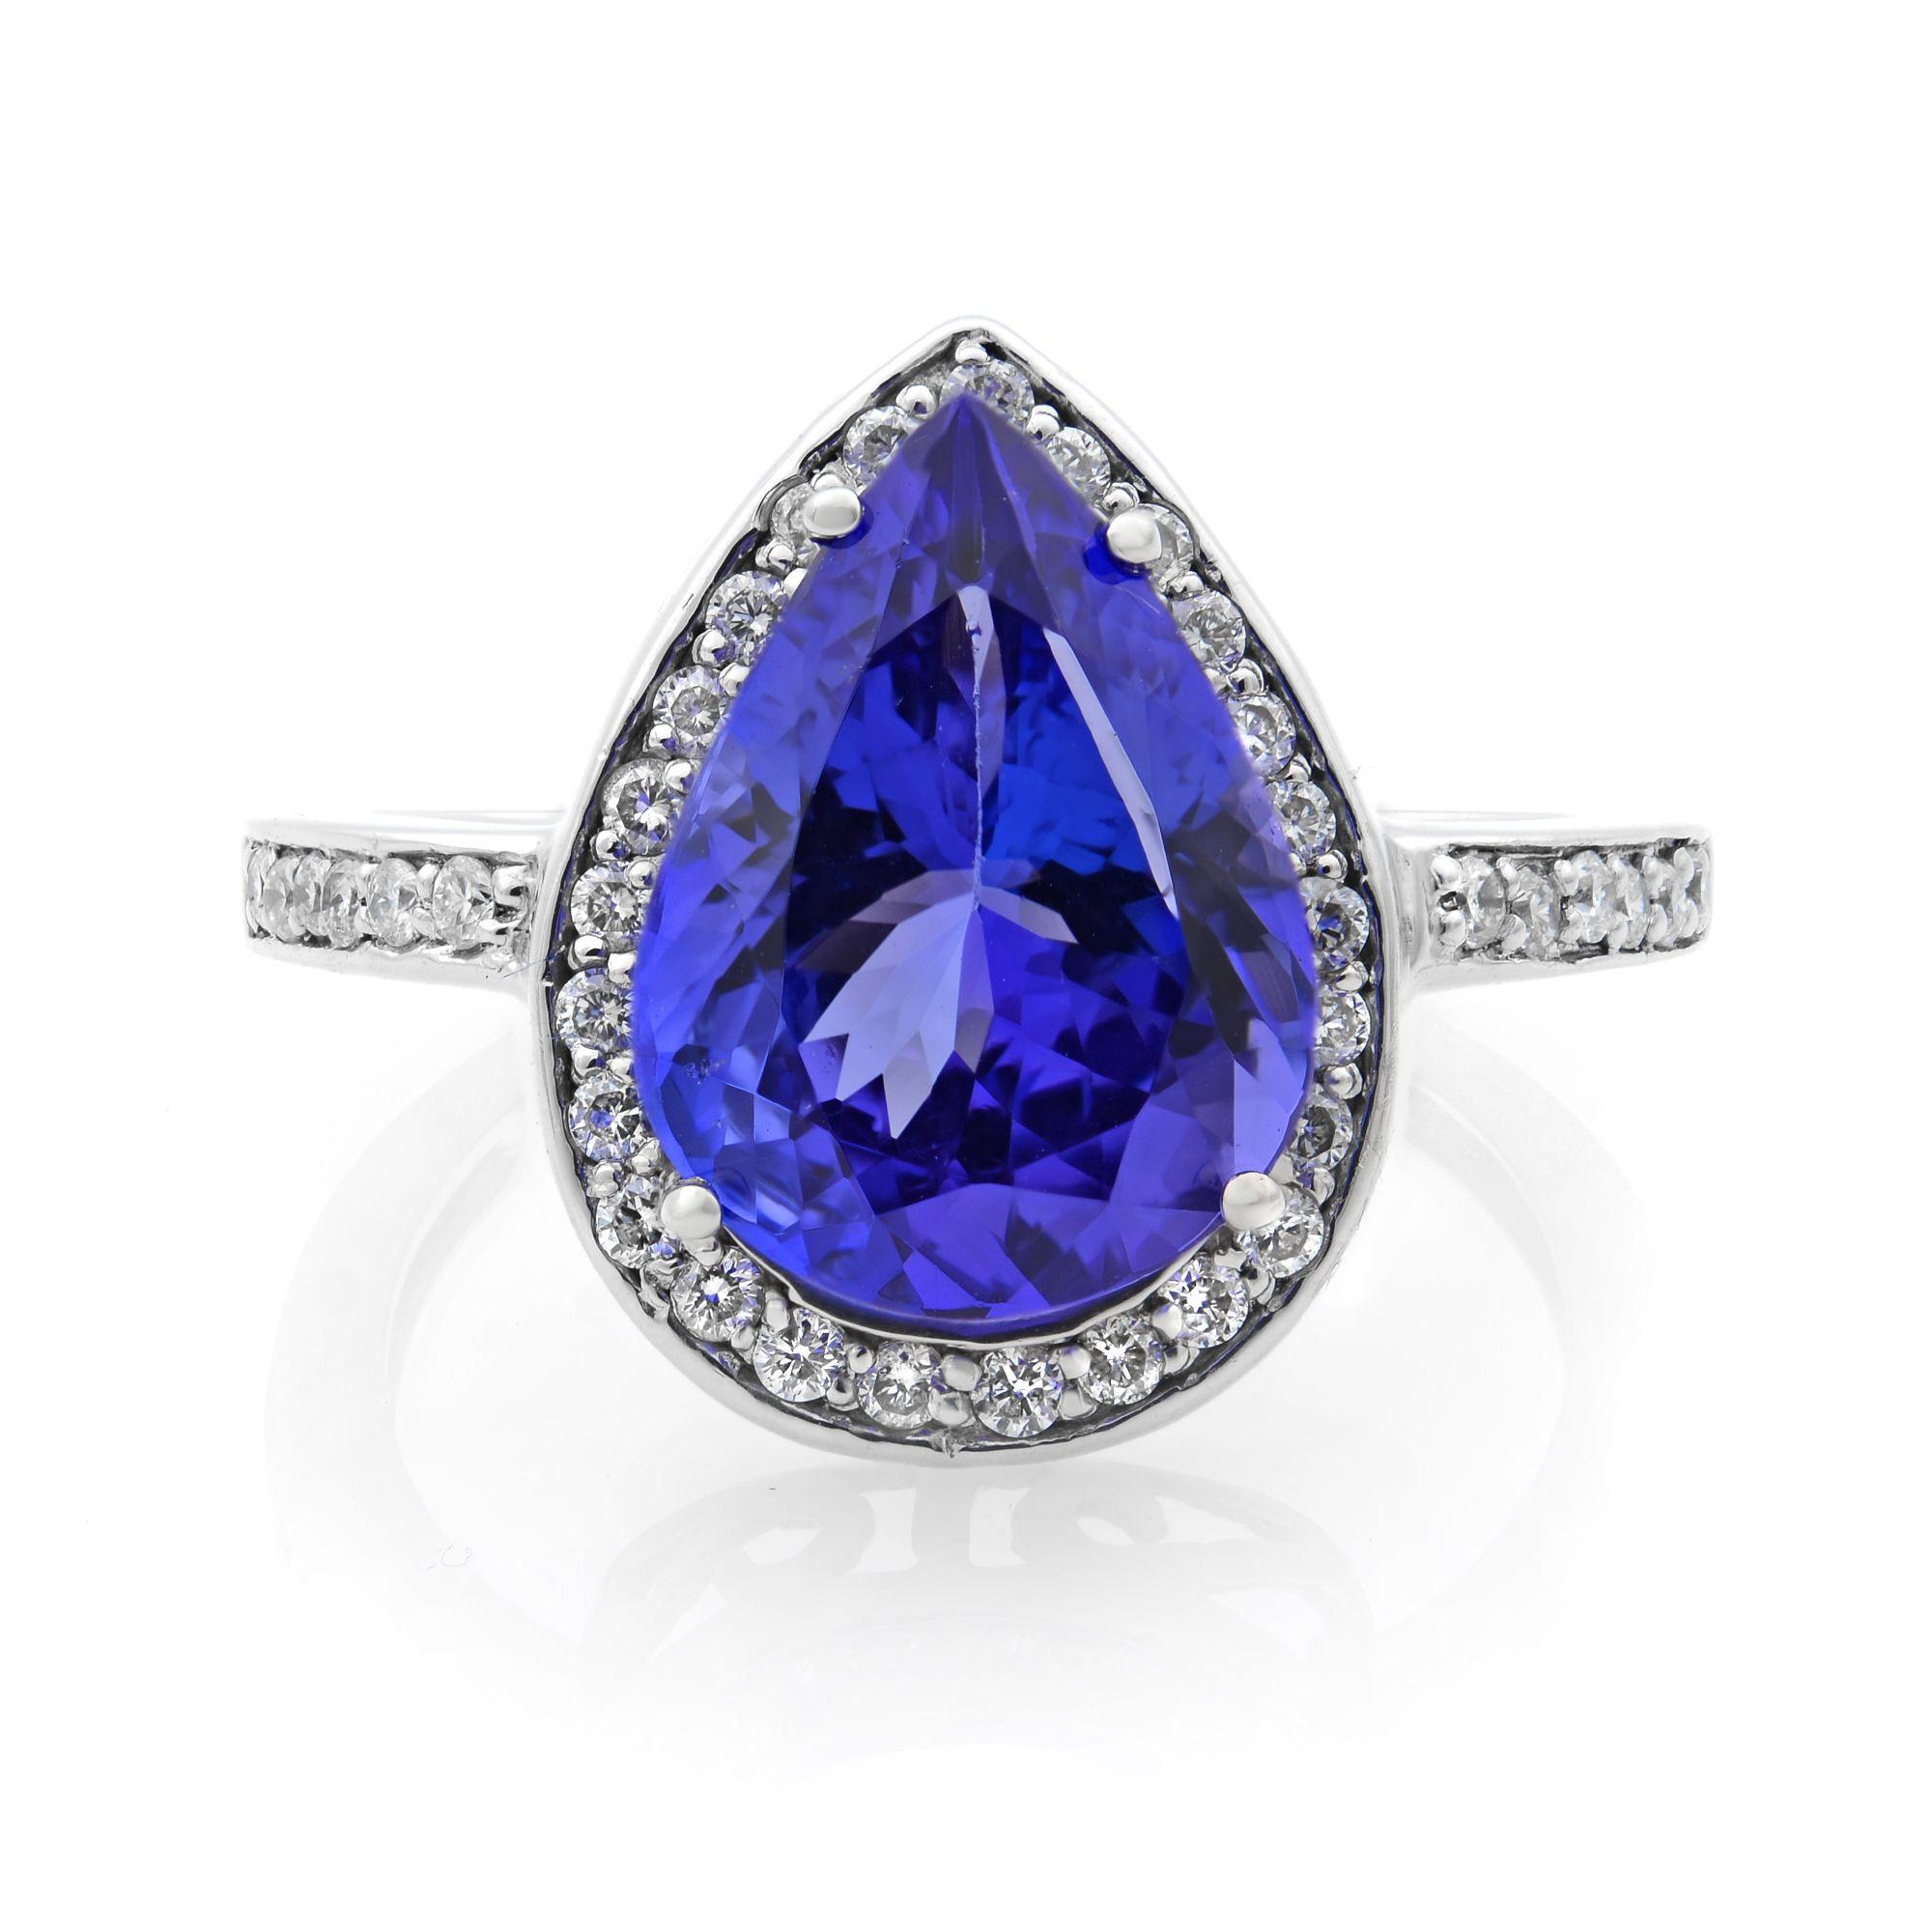 Give your fine jewelry collection a touch of glamour with our stunning tanzanite and diamond ring, featuring a dazzling pear shaped 3.00 carat tanzanite center stone beautifully held in a classic setting and surrounded by a glistening halo of 0.50